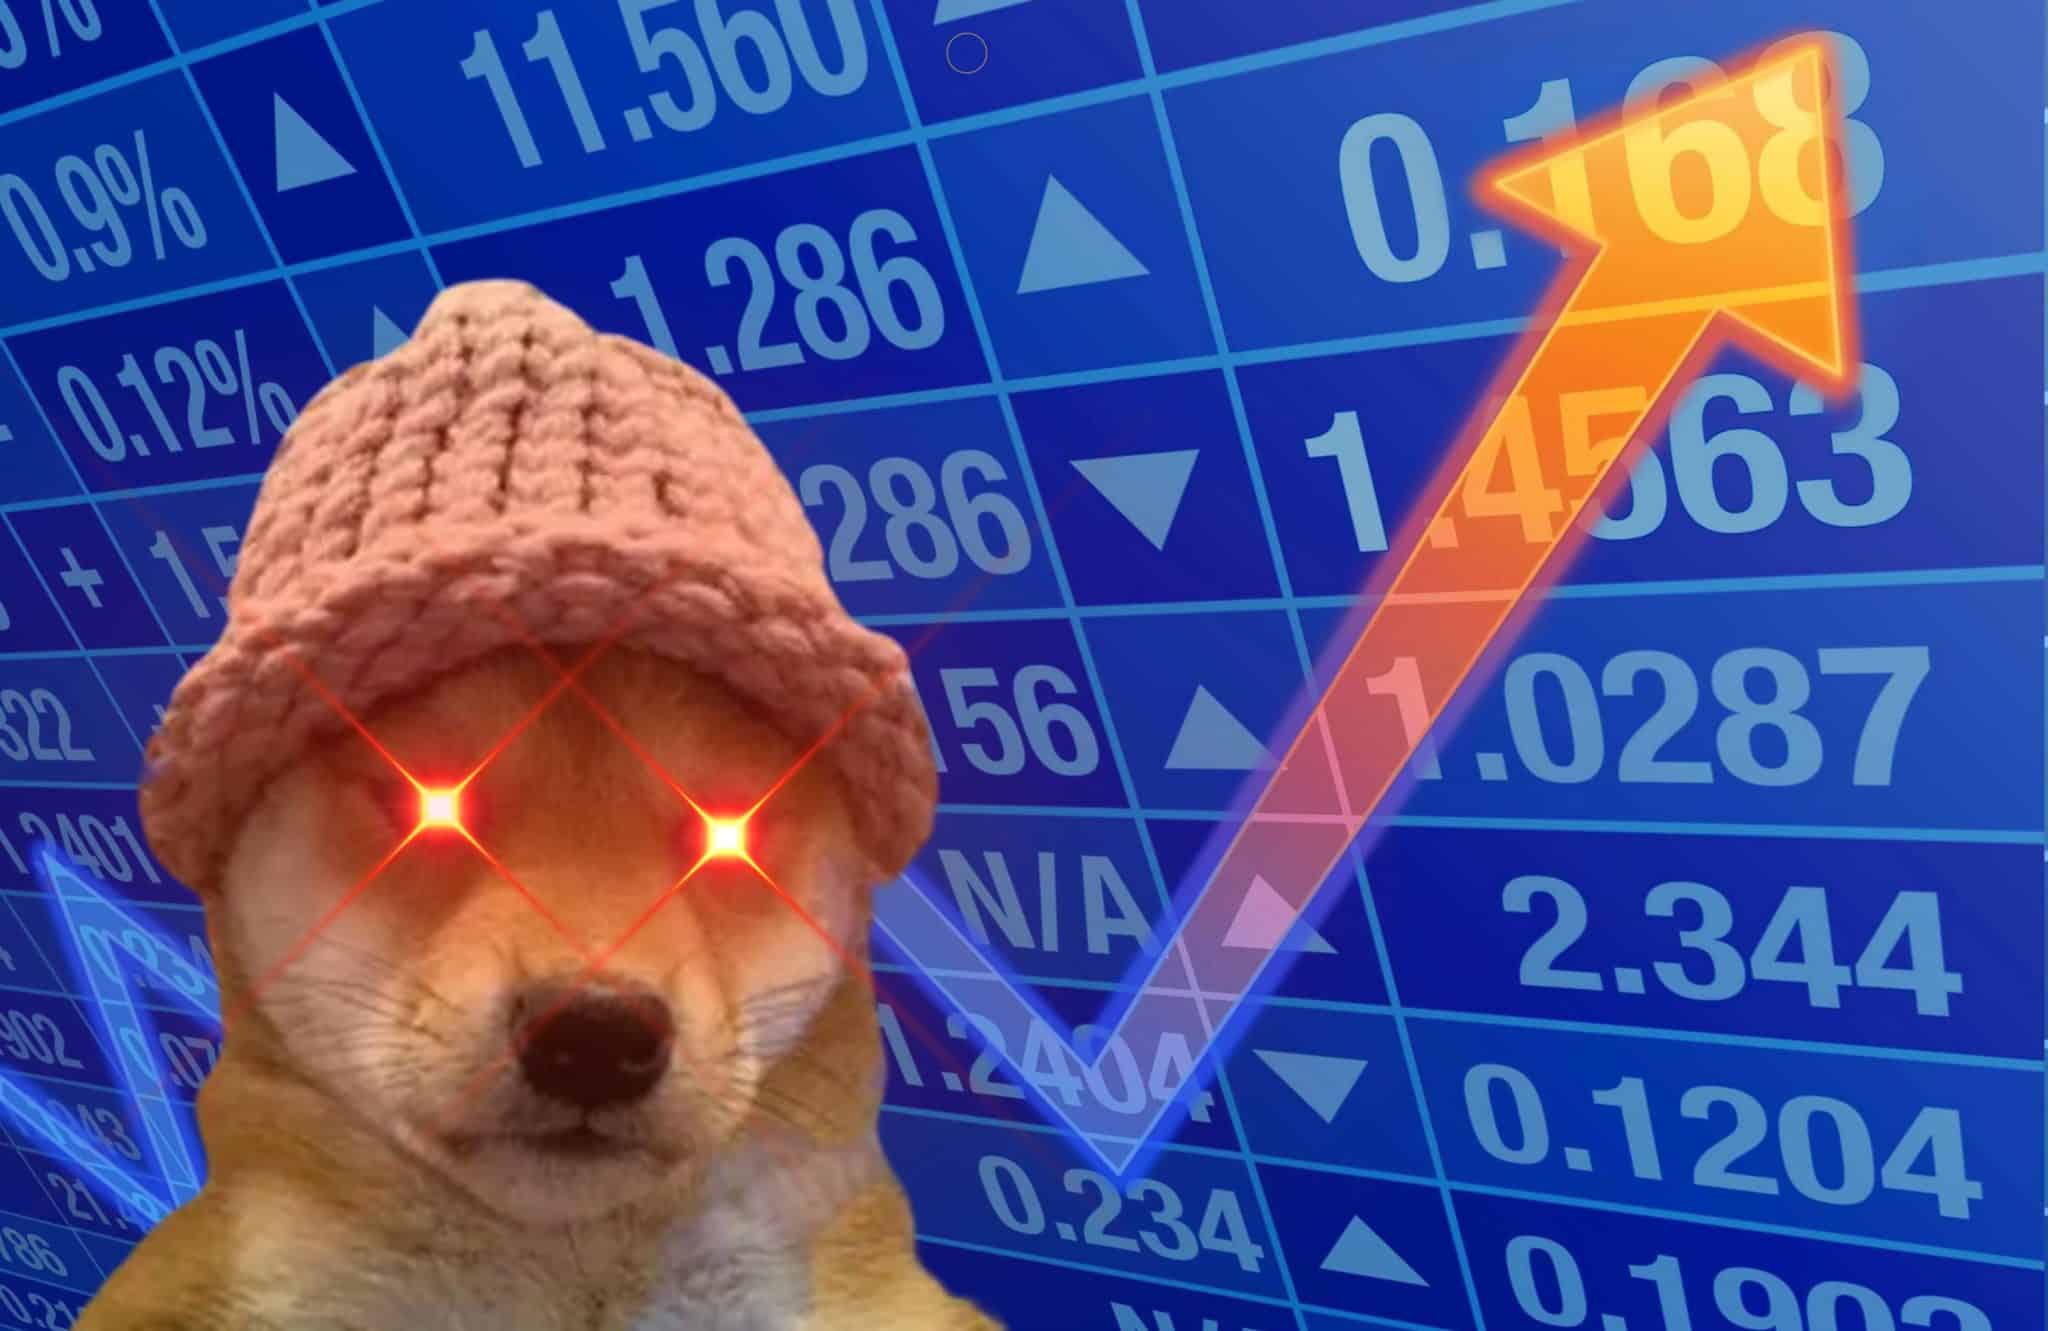 WIF Price Analysis: Elon Musk's mention of Dogwifhat has taken the crypto world by storm. Uncover DogWifHat price action here.